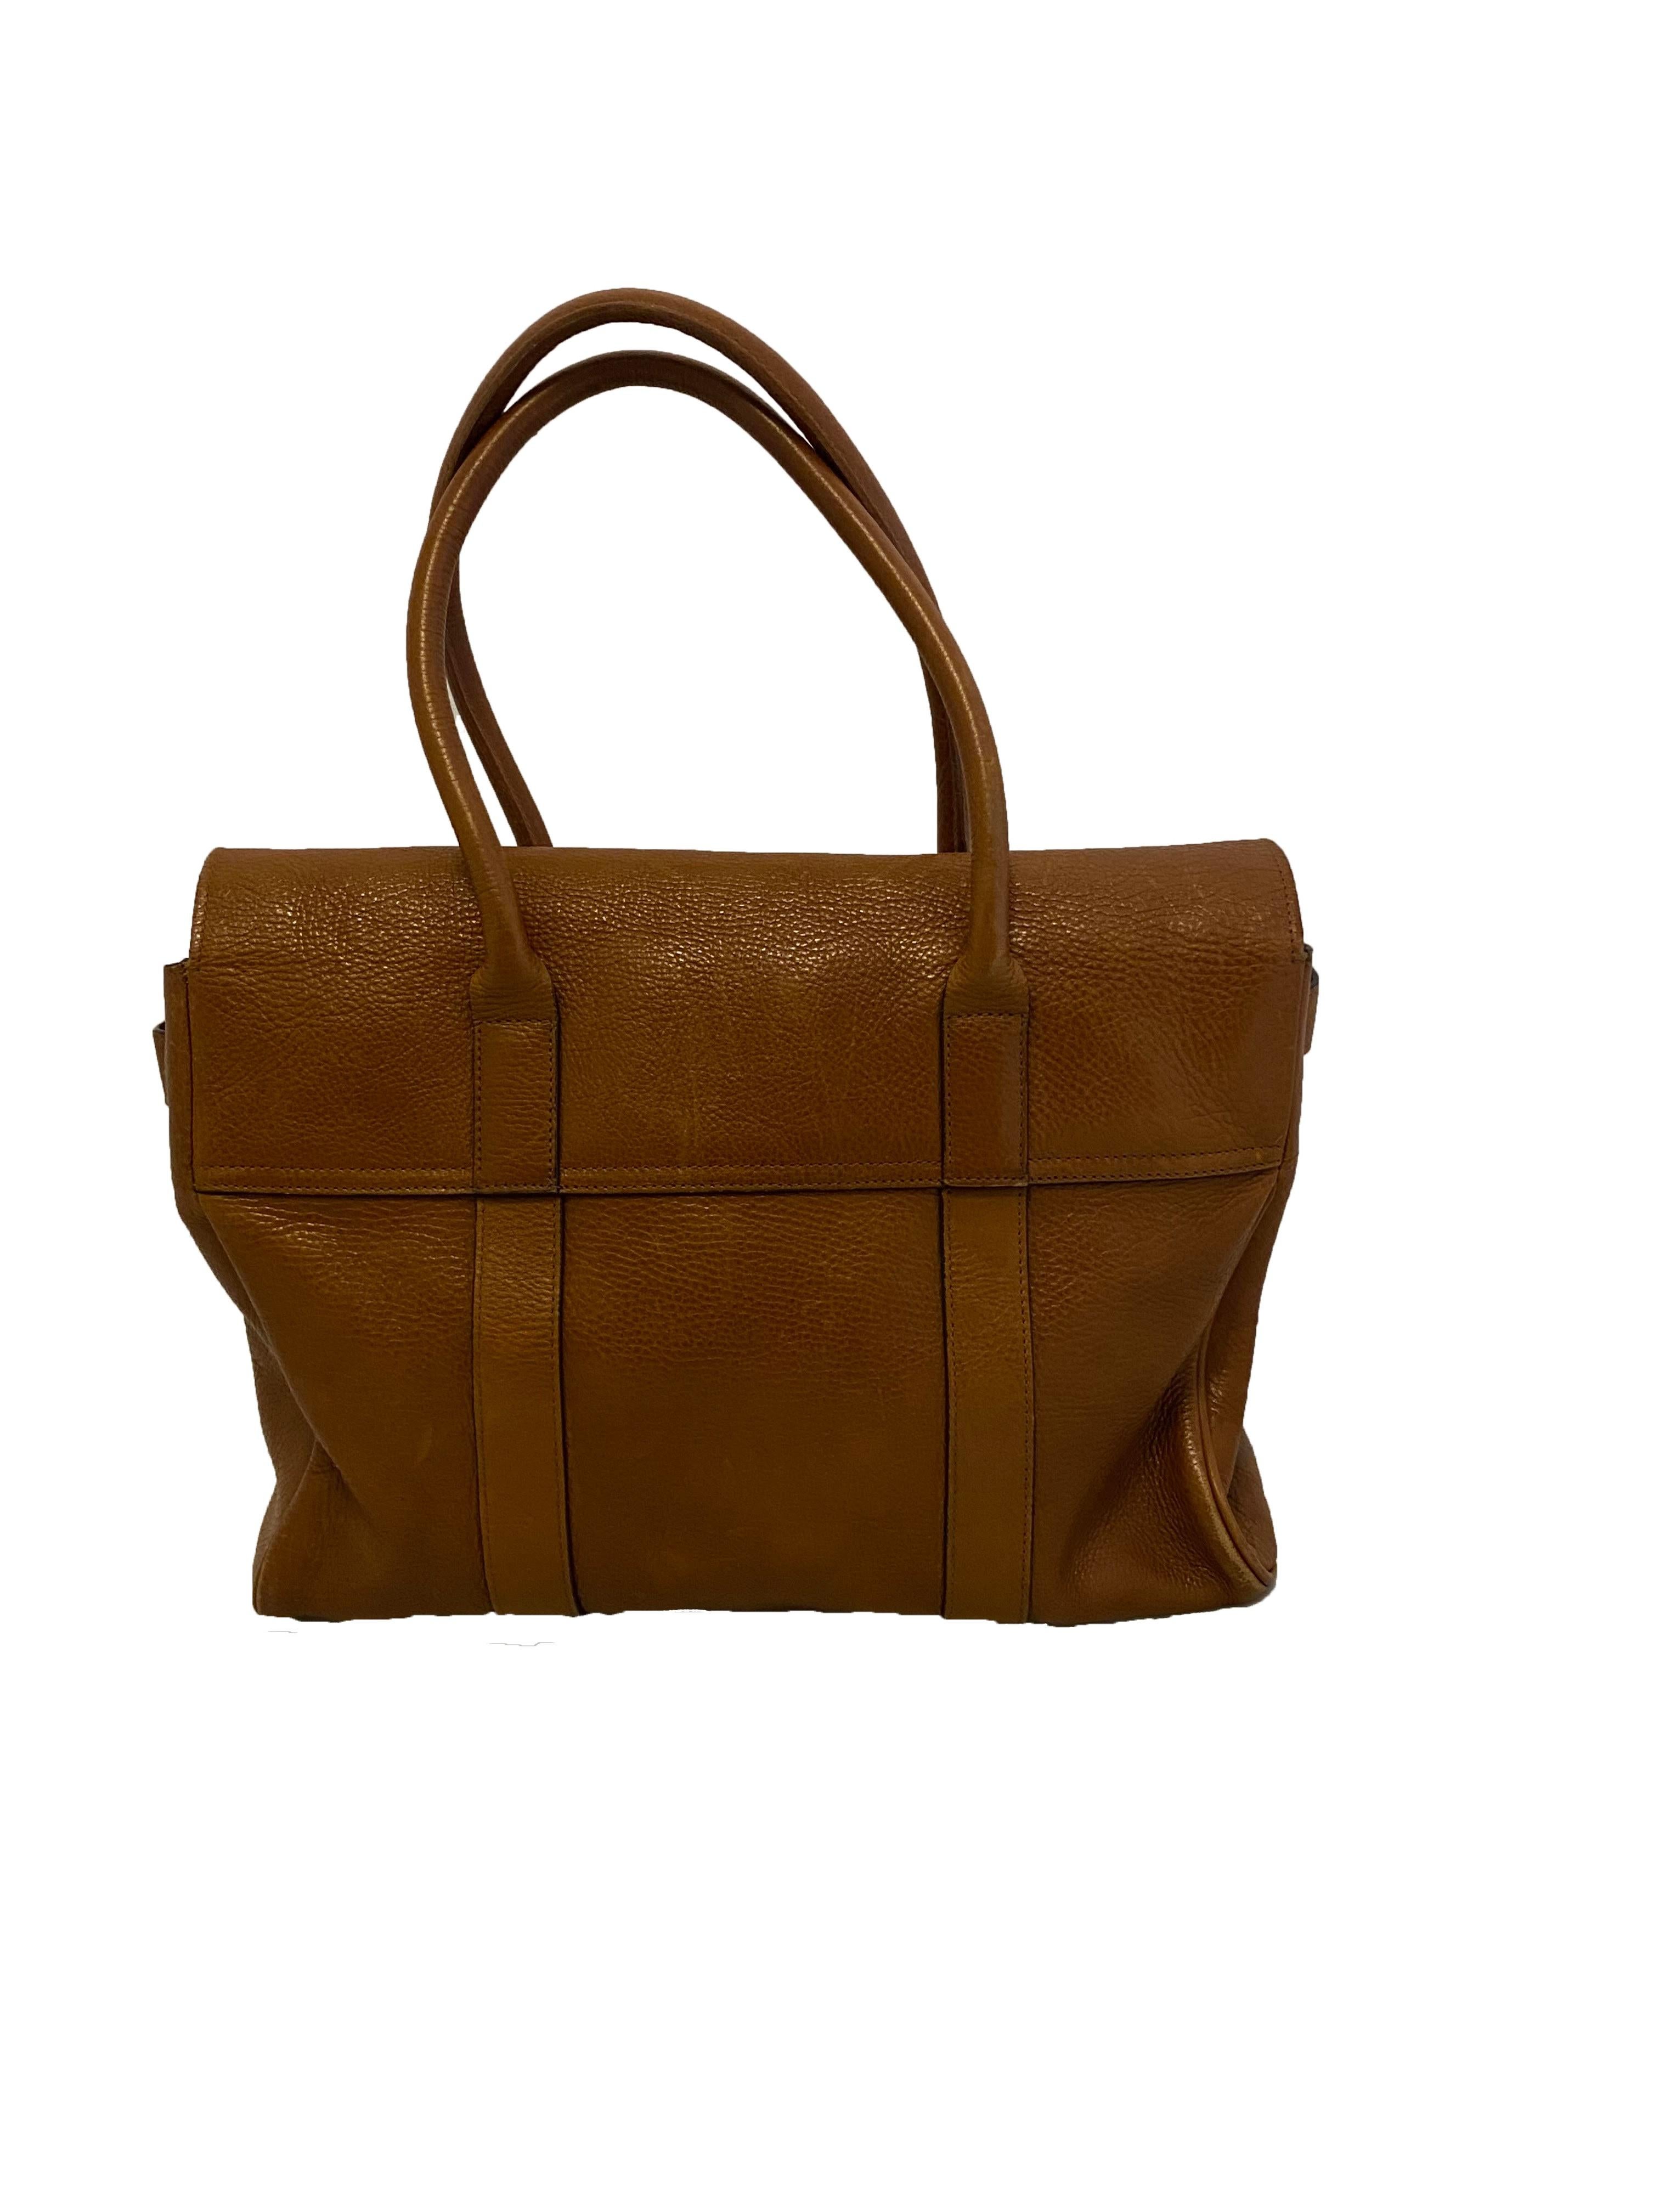 Woven Leather Mulberry Bayswater Bag In Fair Condition For Sale In Glasgow, GB